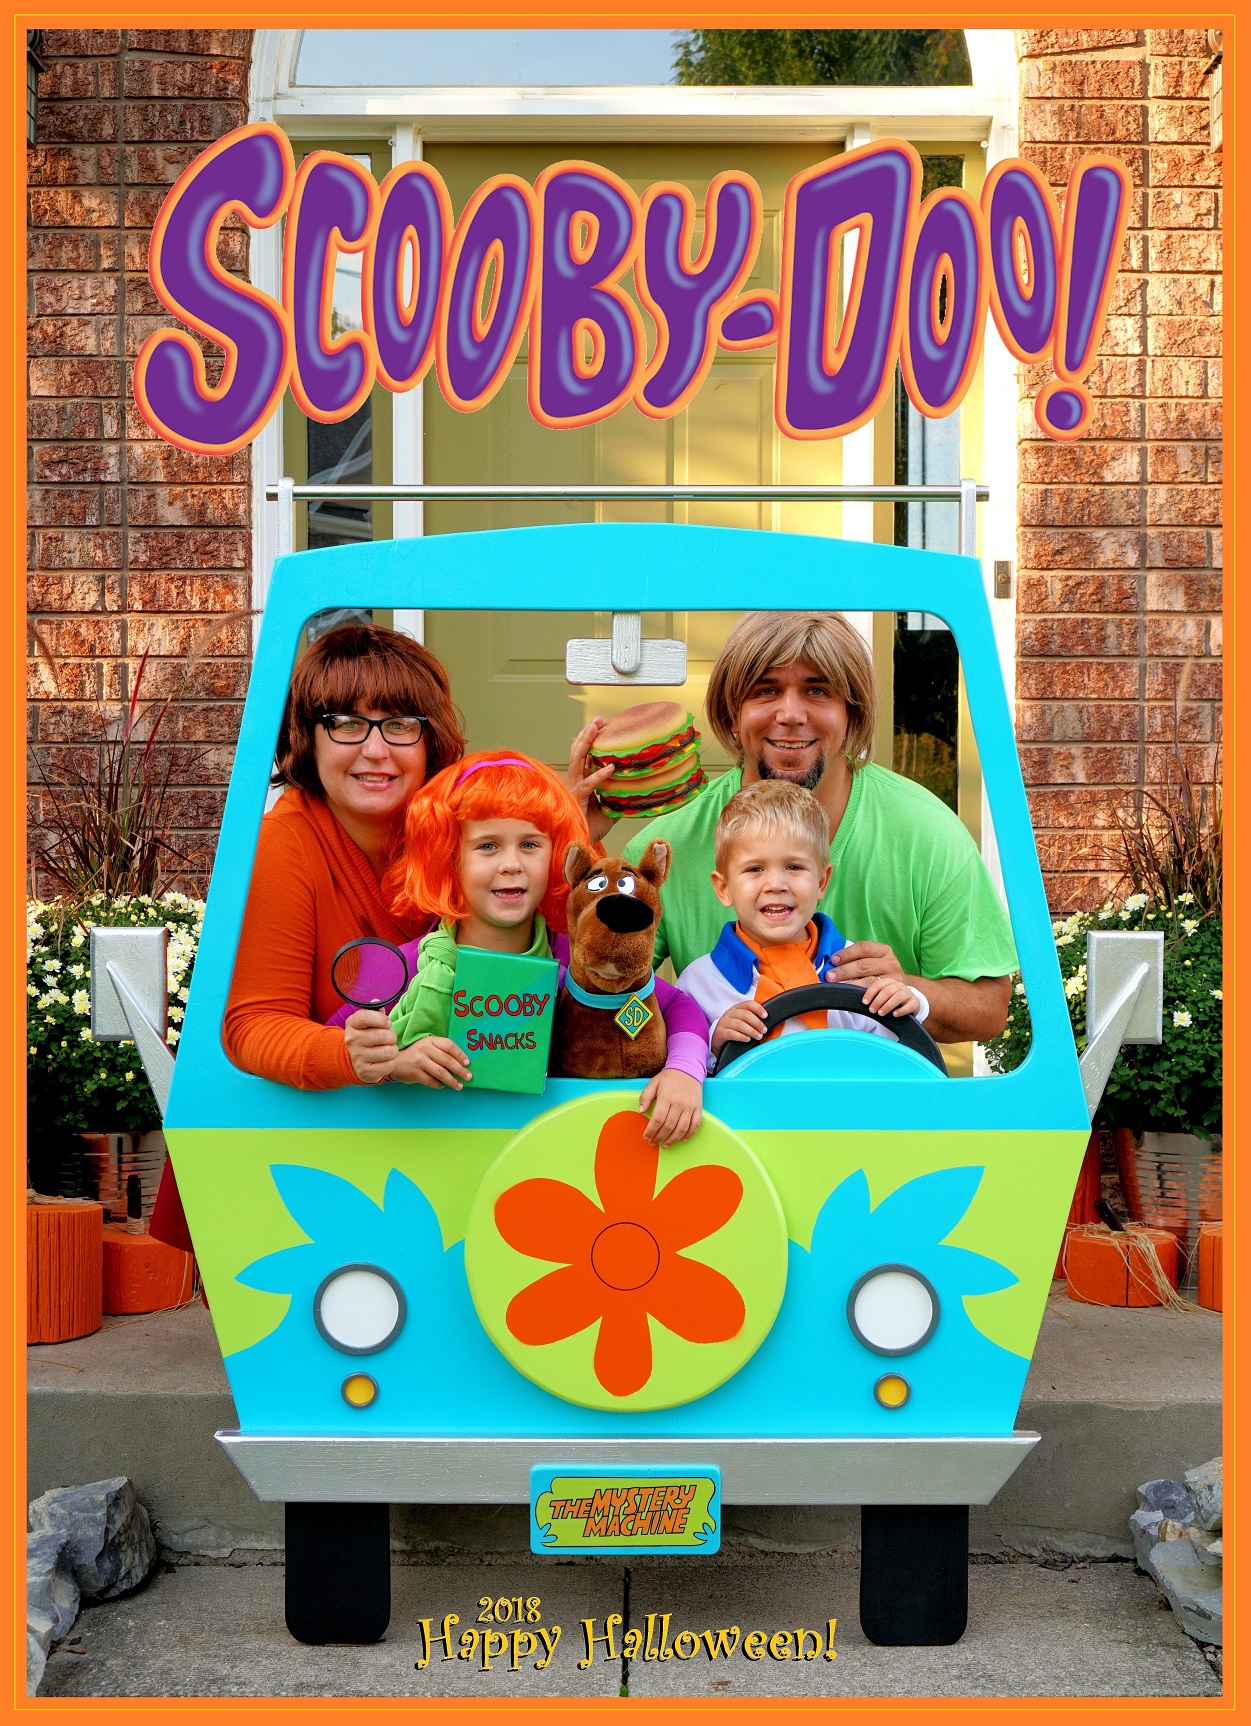 Scooby-Doo! Family Halloween Costume with Hand Built Mystery Machine!